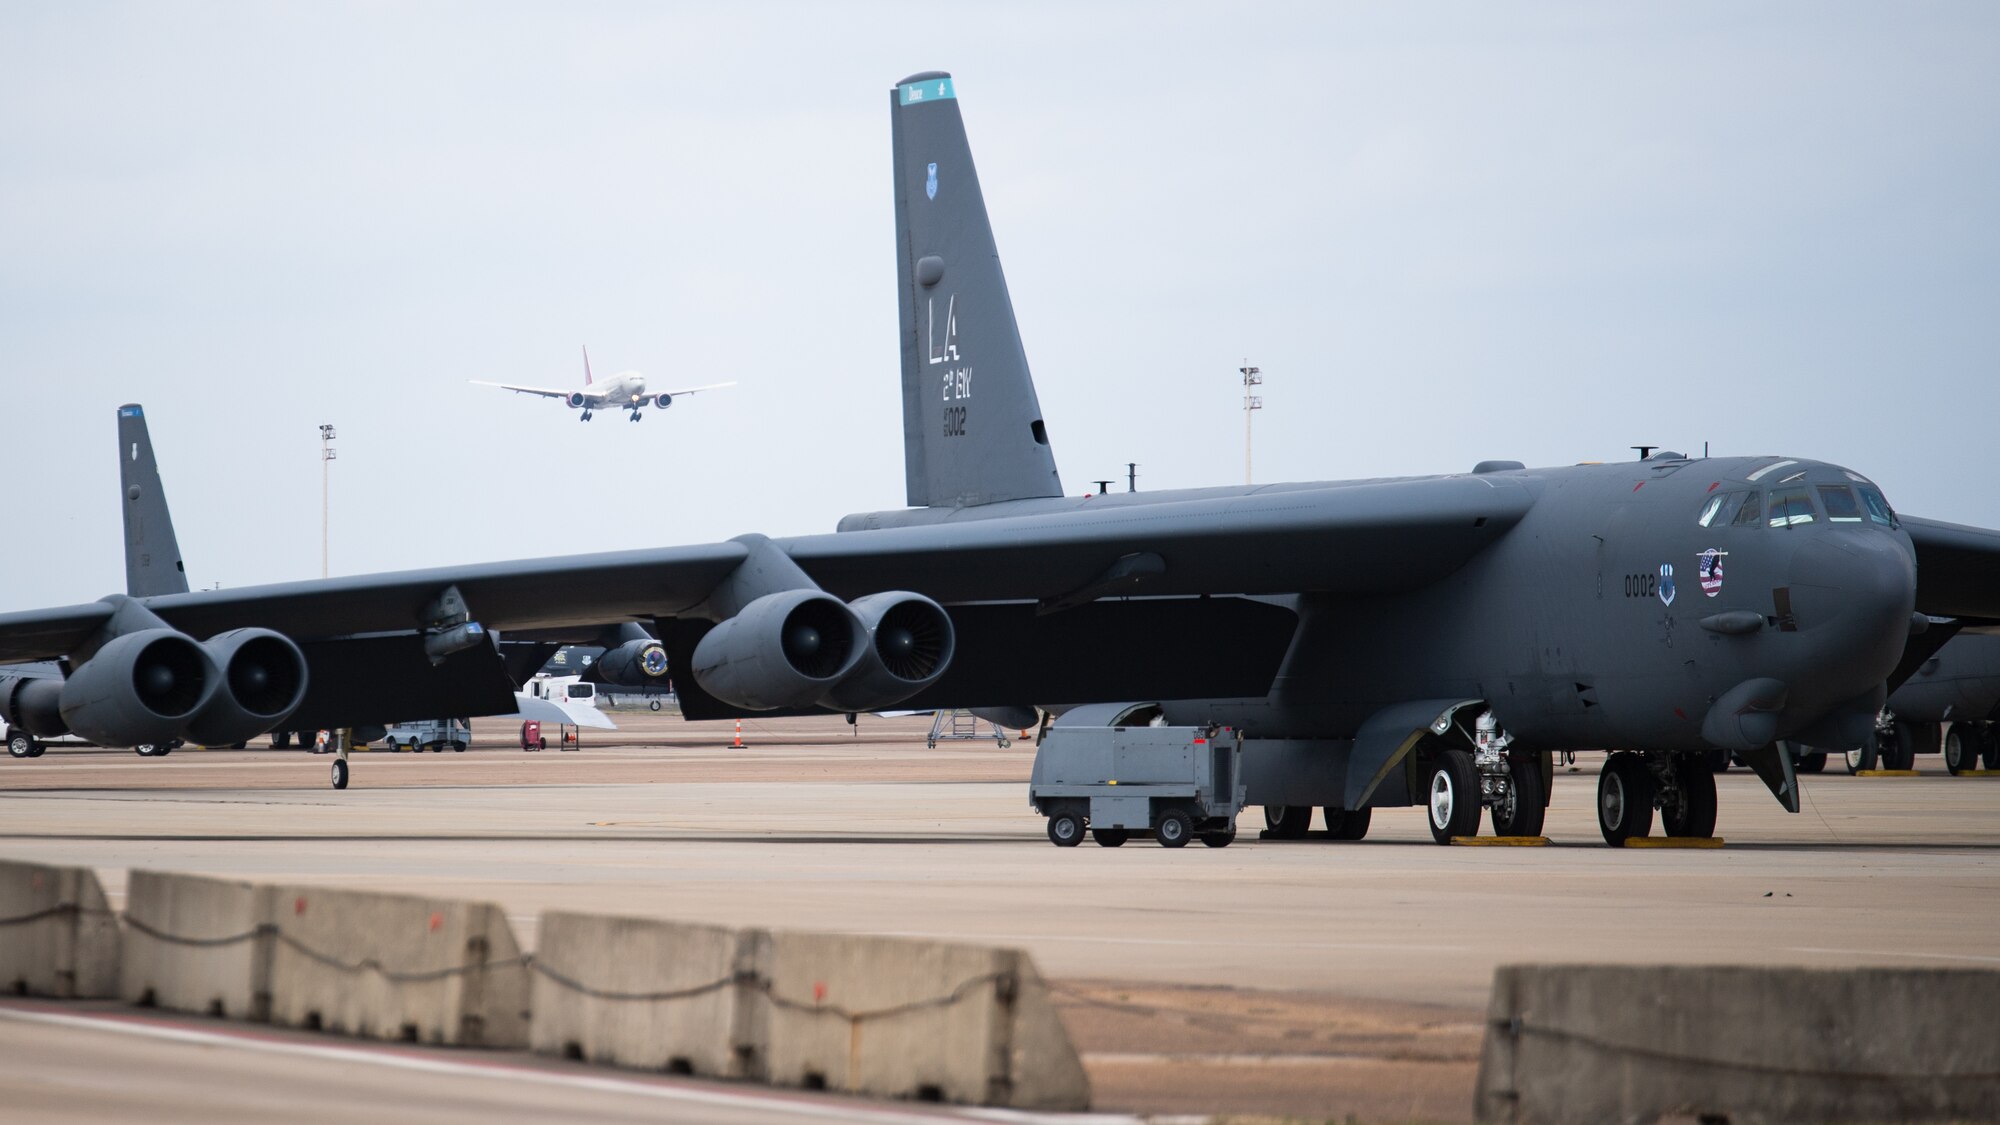 A plane carrying Airmen from the 2nd Bomb Wing returns to Barksdale Air Force Base, La., Feb. 24, 2021, after a Bomber Task Force deployment to Andersen Air Force Base, Guam. The 2nd BW routinely conducts BTFs, working with allies and partners to ensure lethality and familiarity in various regions. (U.S. Air Force photo by Airman 1st Class Jacob B. Wrightsman)